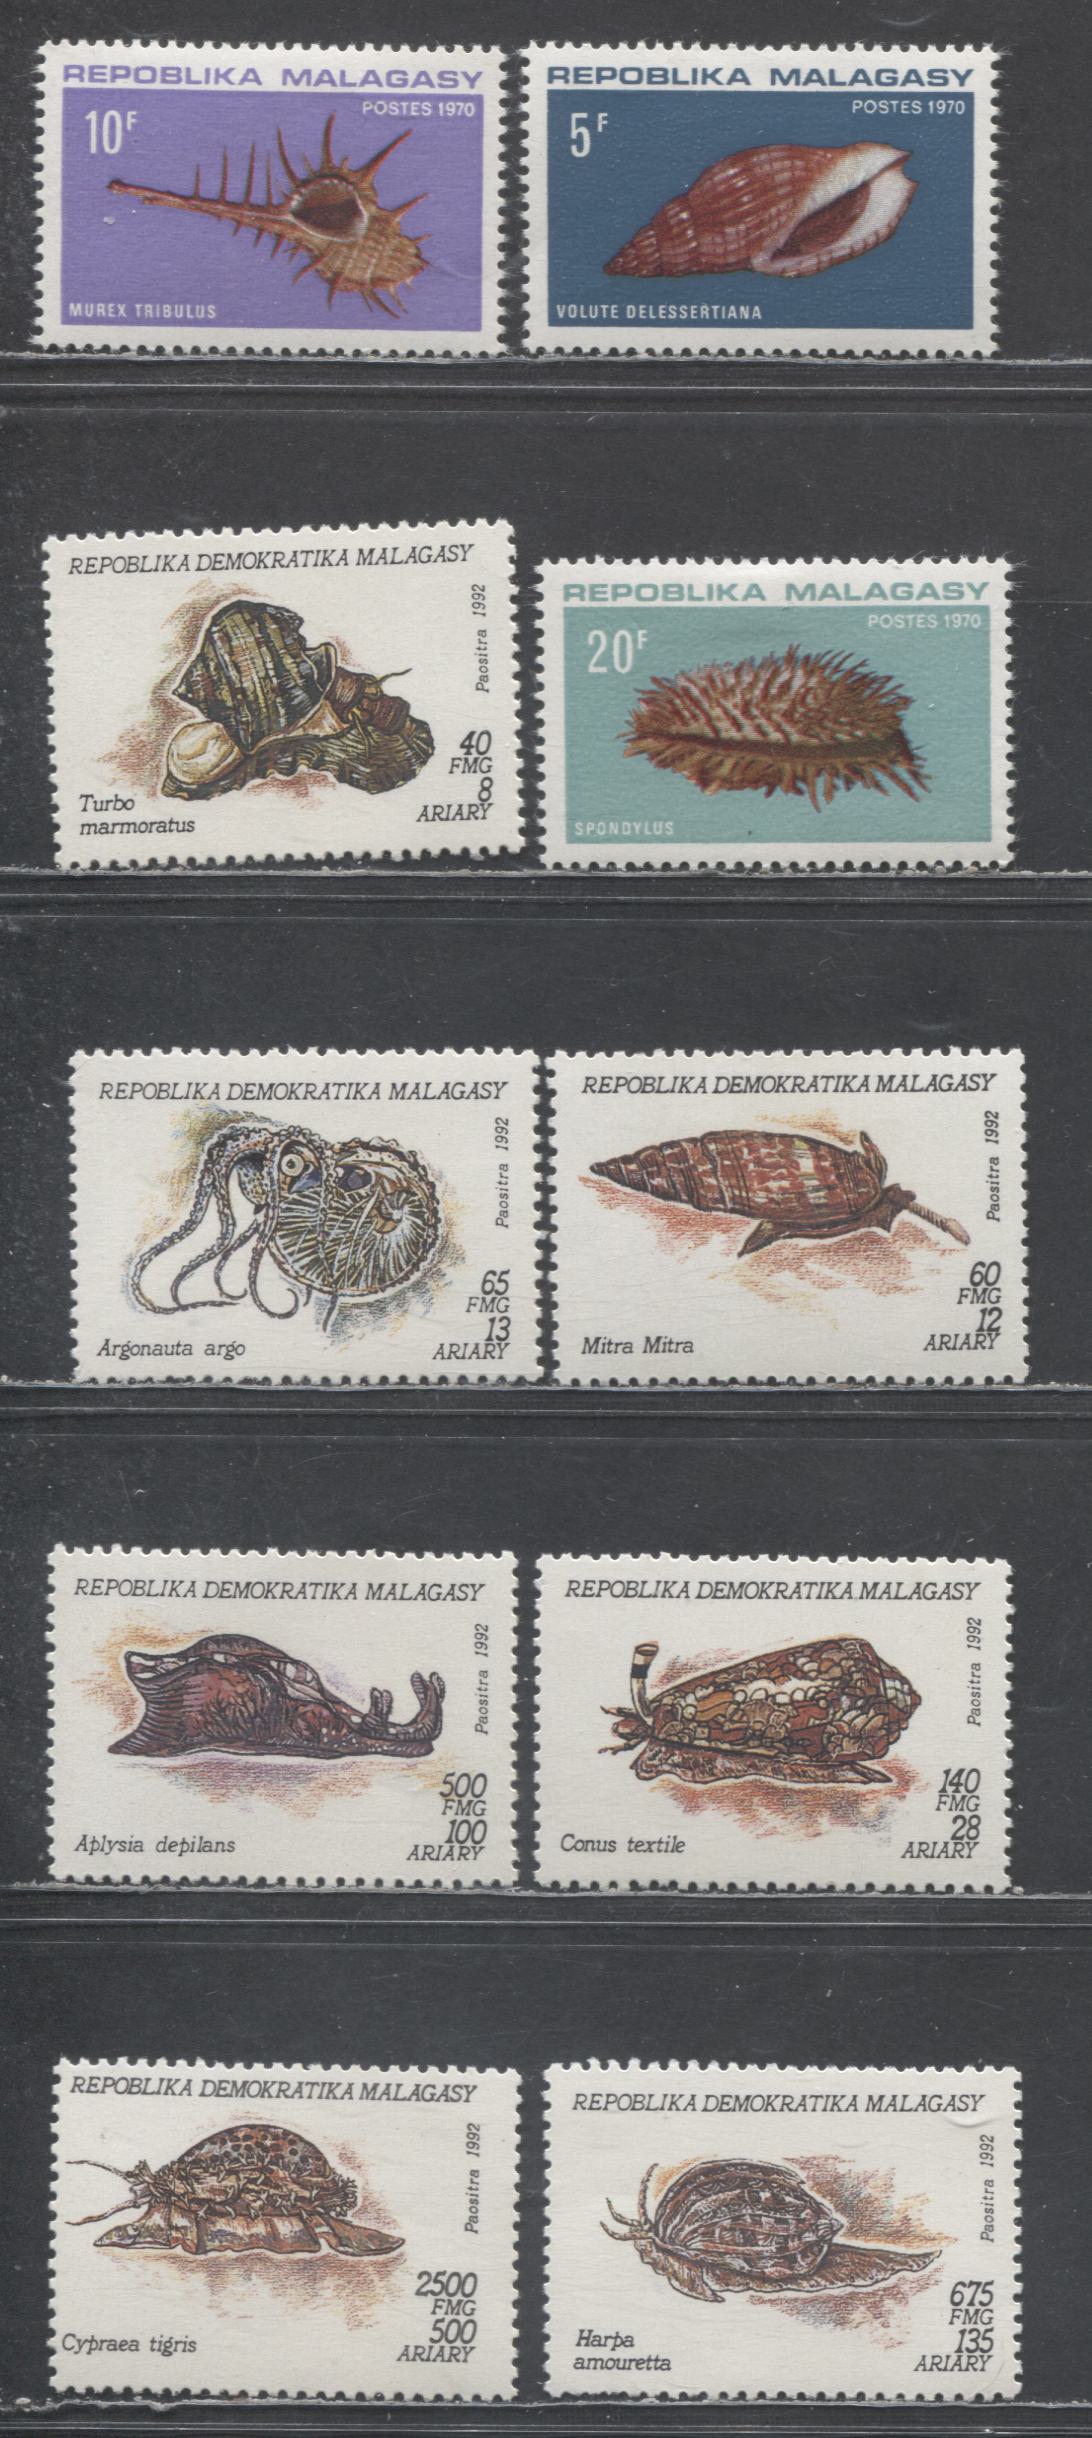 Lot 75 Malagasy Republic SC#447/1128 1970-1993 Shells & Mollusks Issues, 10 VFOG/NH Singles, Click on Listing to See ALL Pictures, 2017 Scott Cat. $12.3